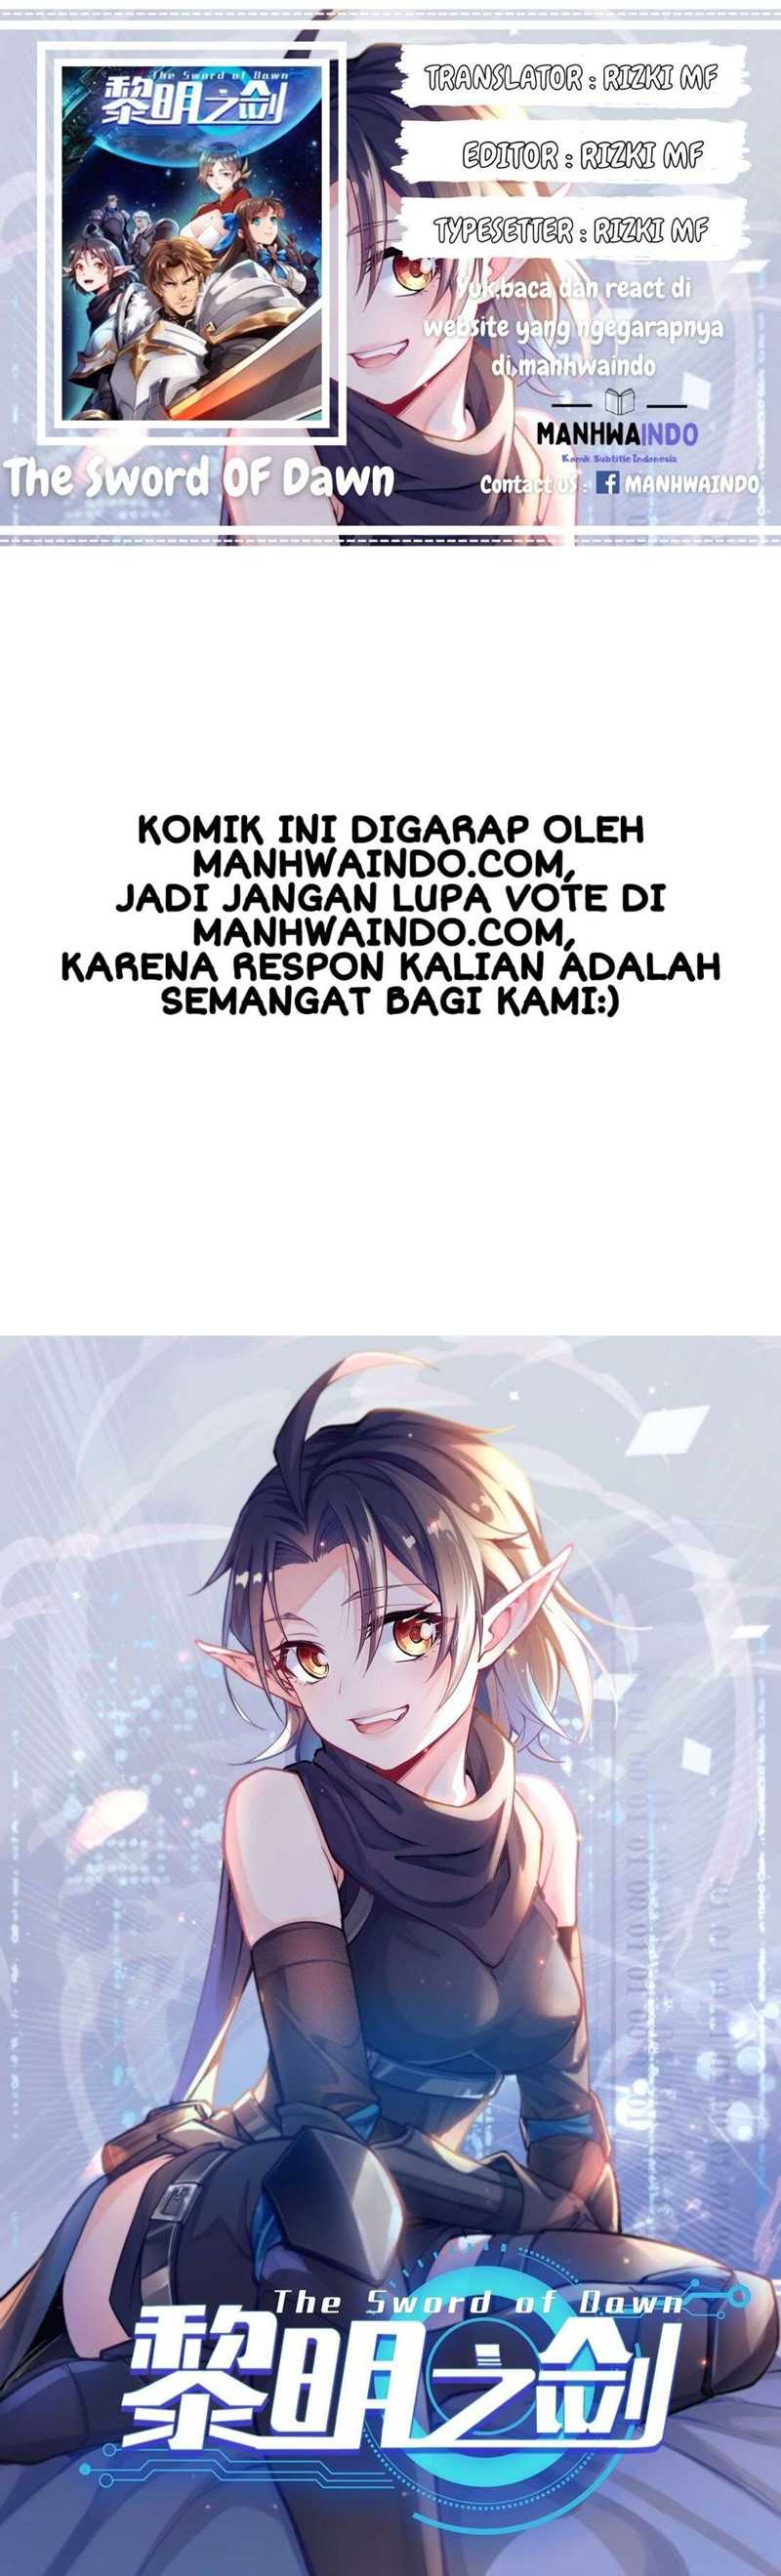 The Sword of Dawn Chapter 08